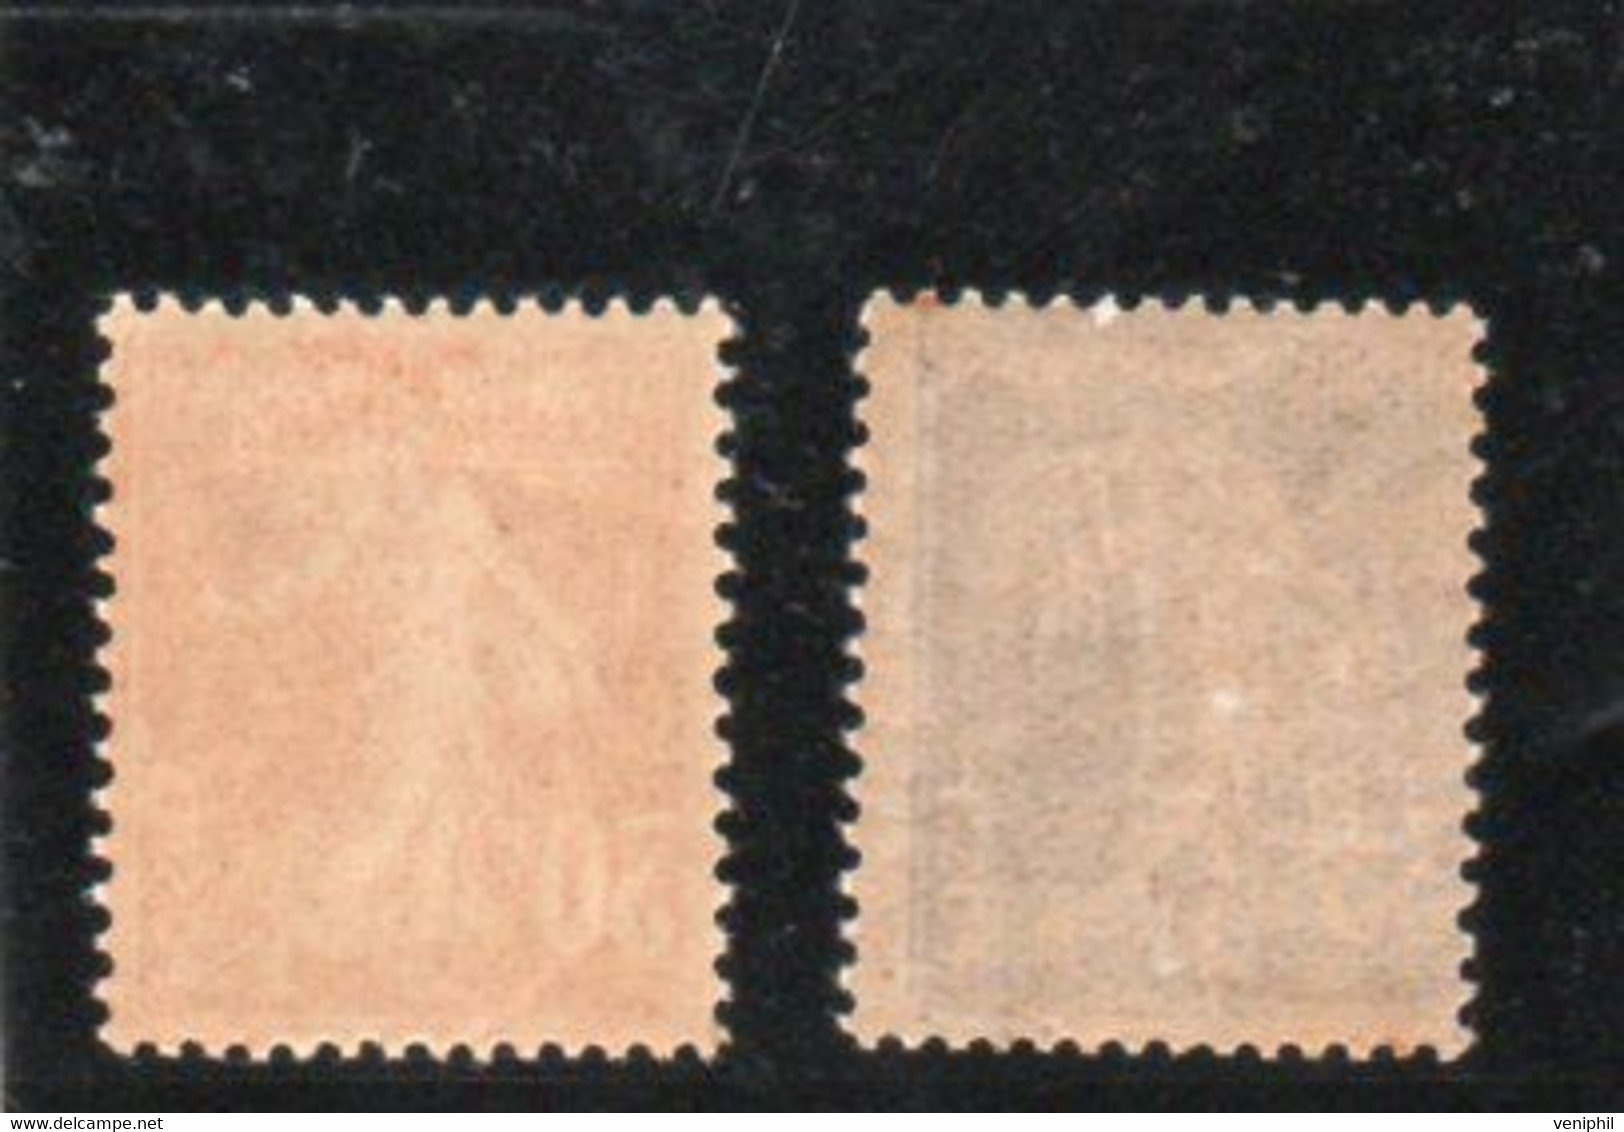 TIMBRES SEMEUSE CAMEE N° 141-142 NEUF TRES INFIME CHARNIERE ANNEE 1907 - COTE : 28 € - 1906-38 Semeuse Camée